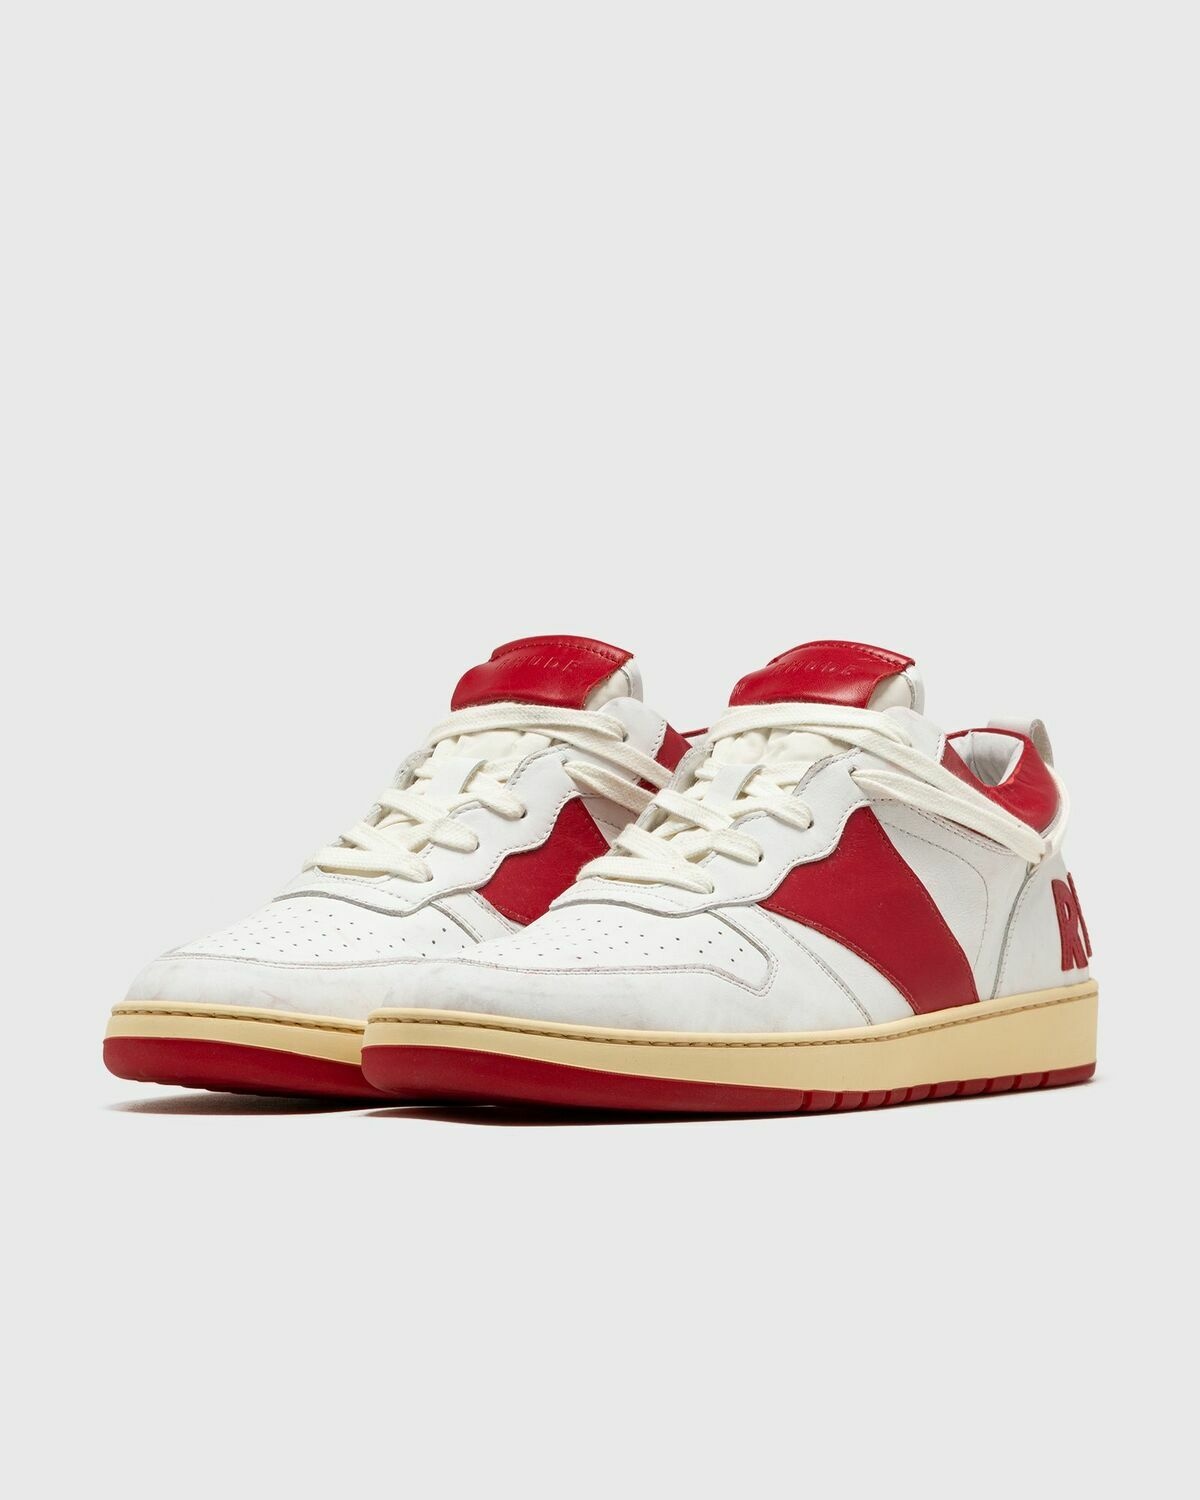 Rhude Rhecess Low Red|White - Mens - Lowtop Rhude